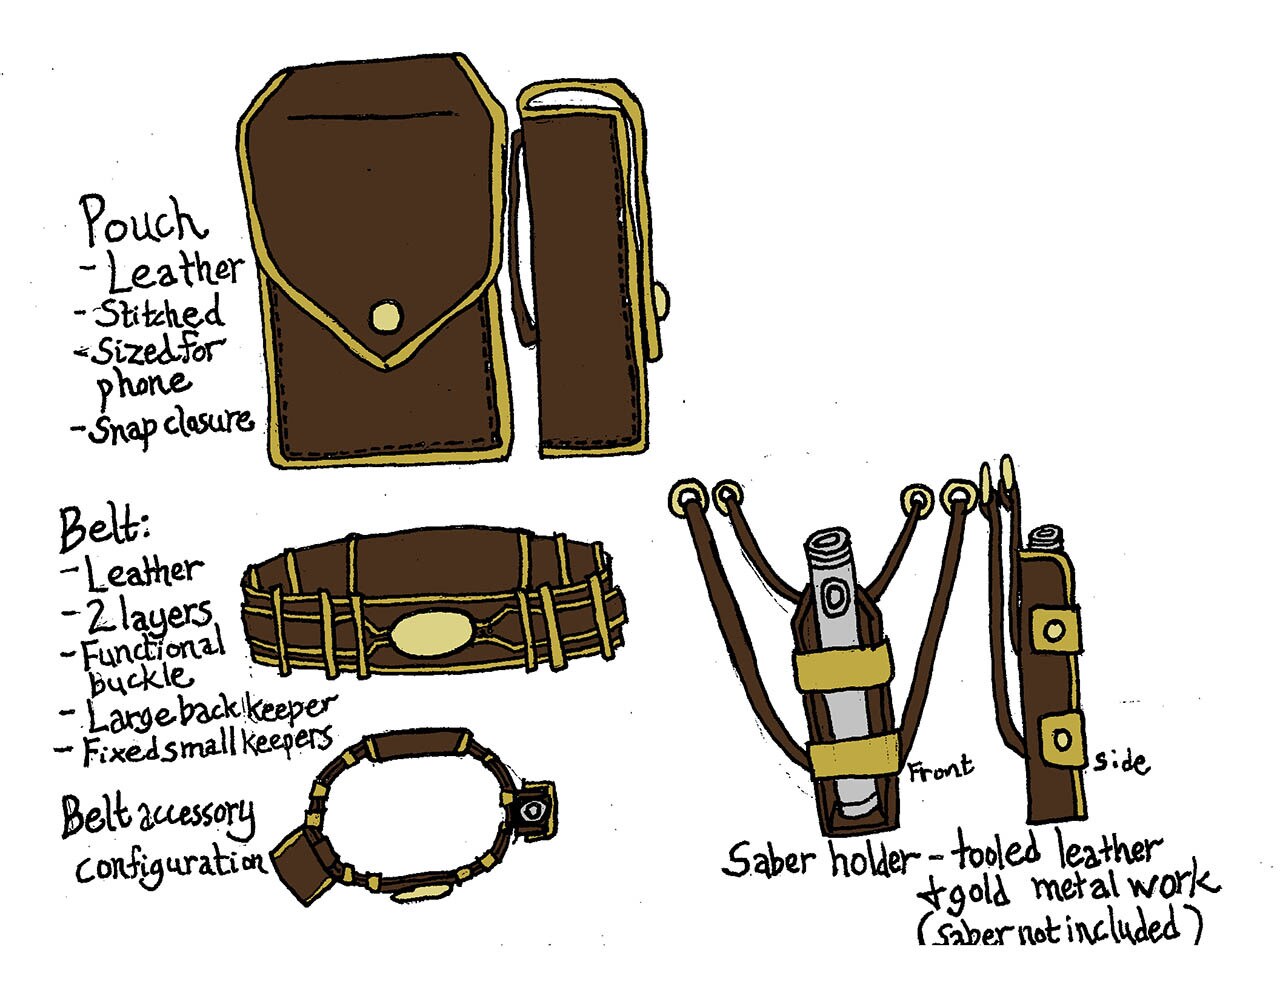 Caitlin Jacques's mission attire sketch pouch and belt for Krystina